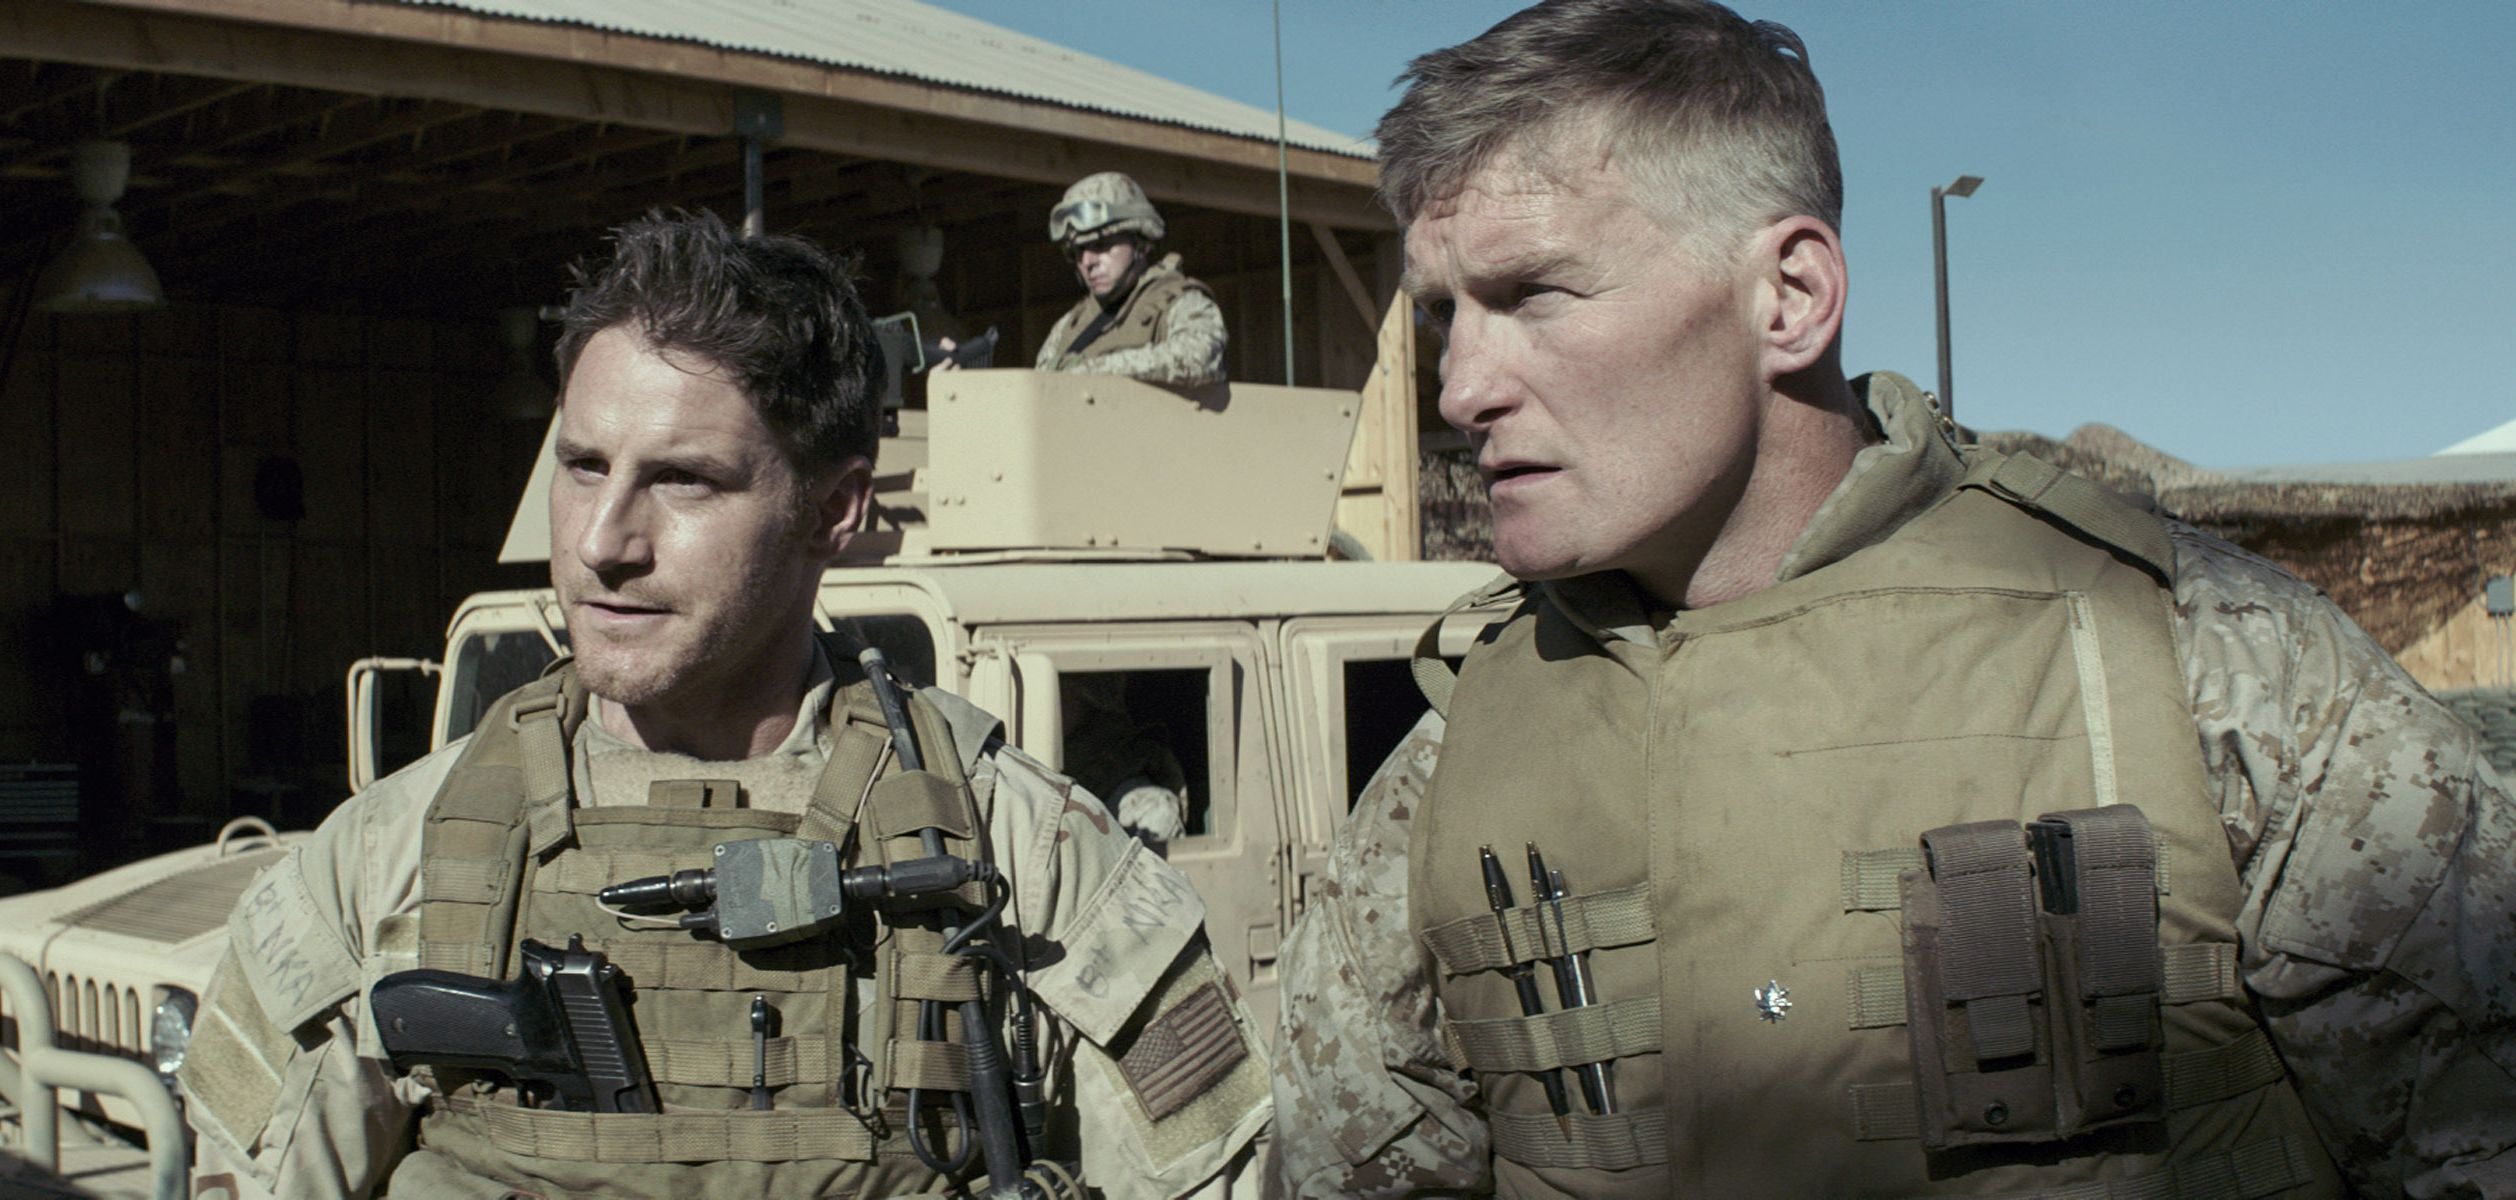 On the street in American Sniper